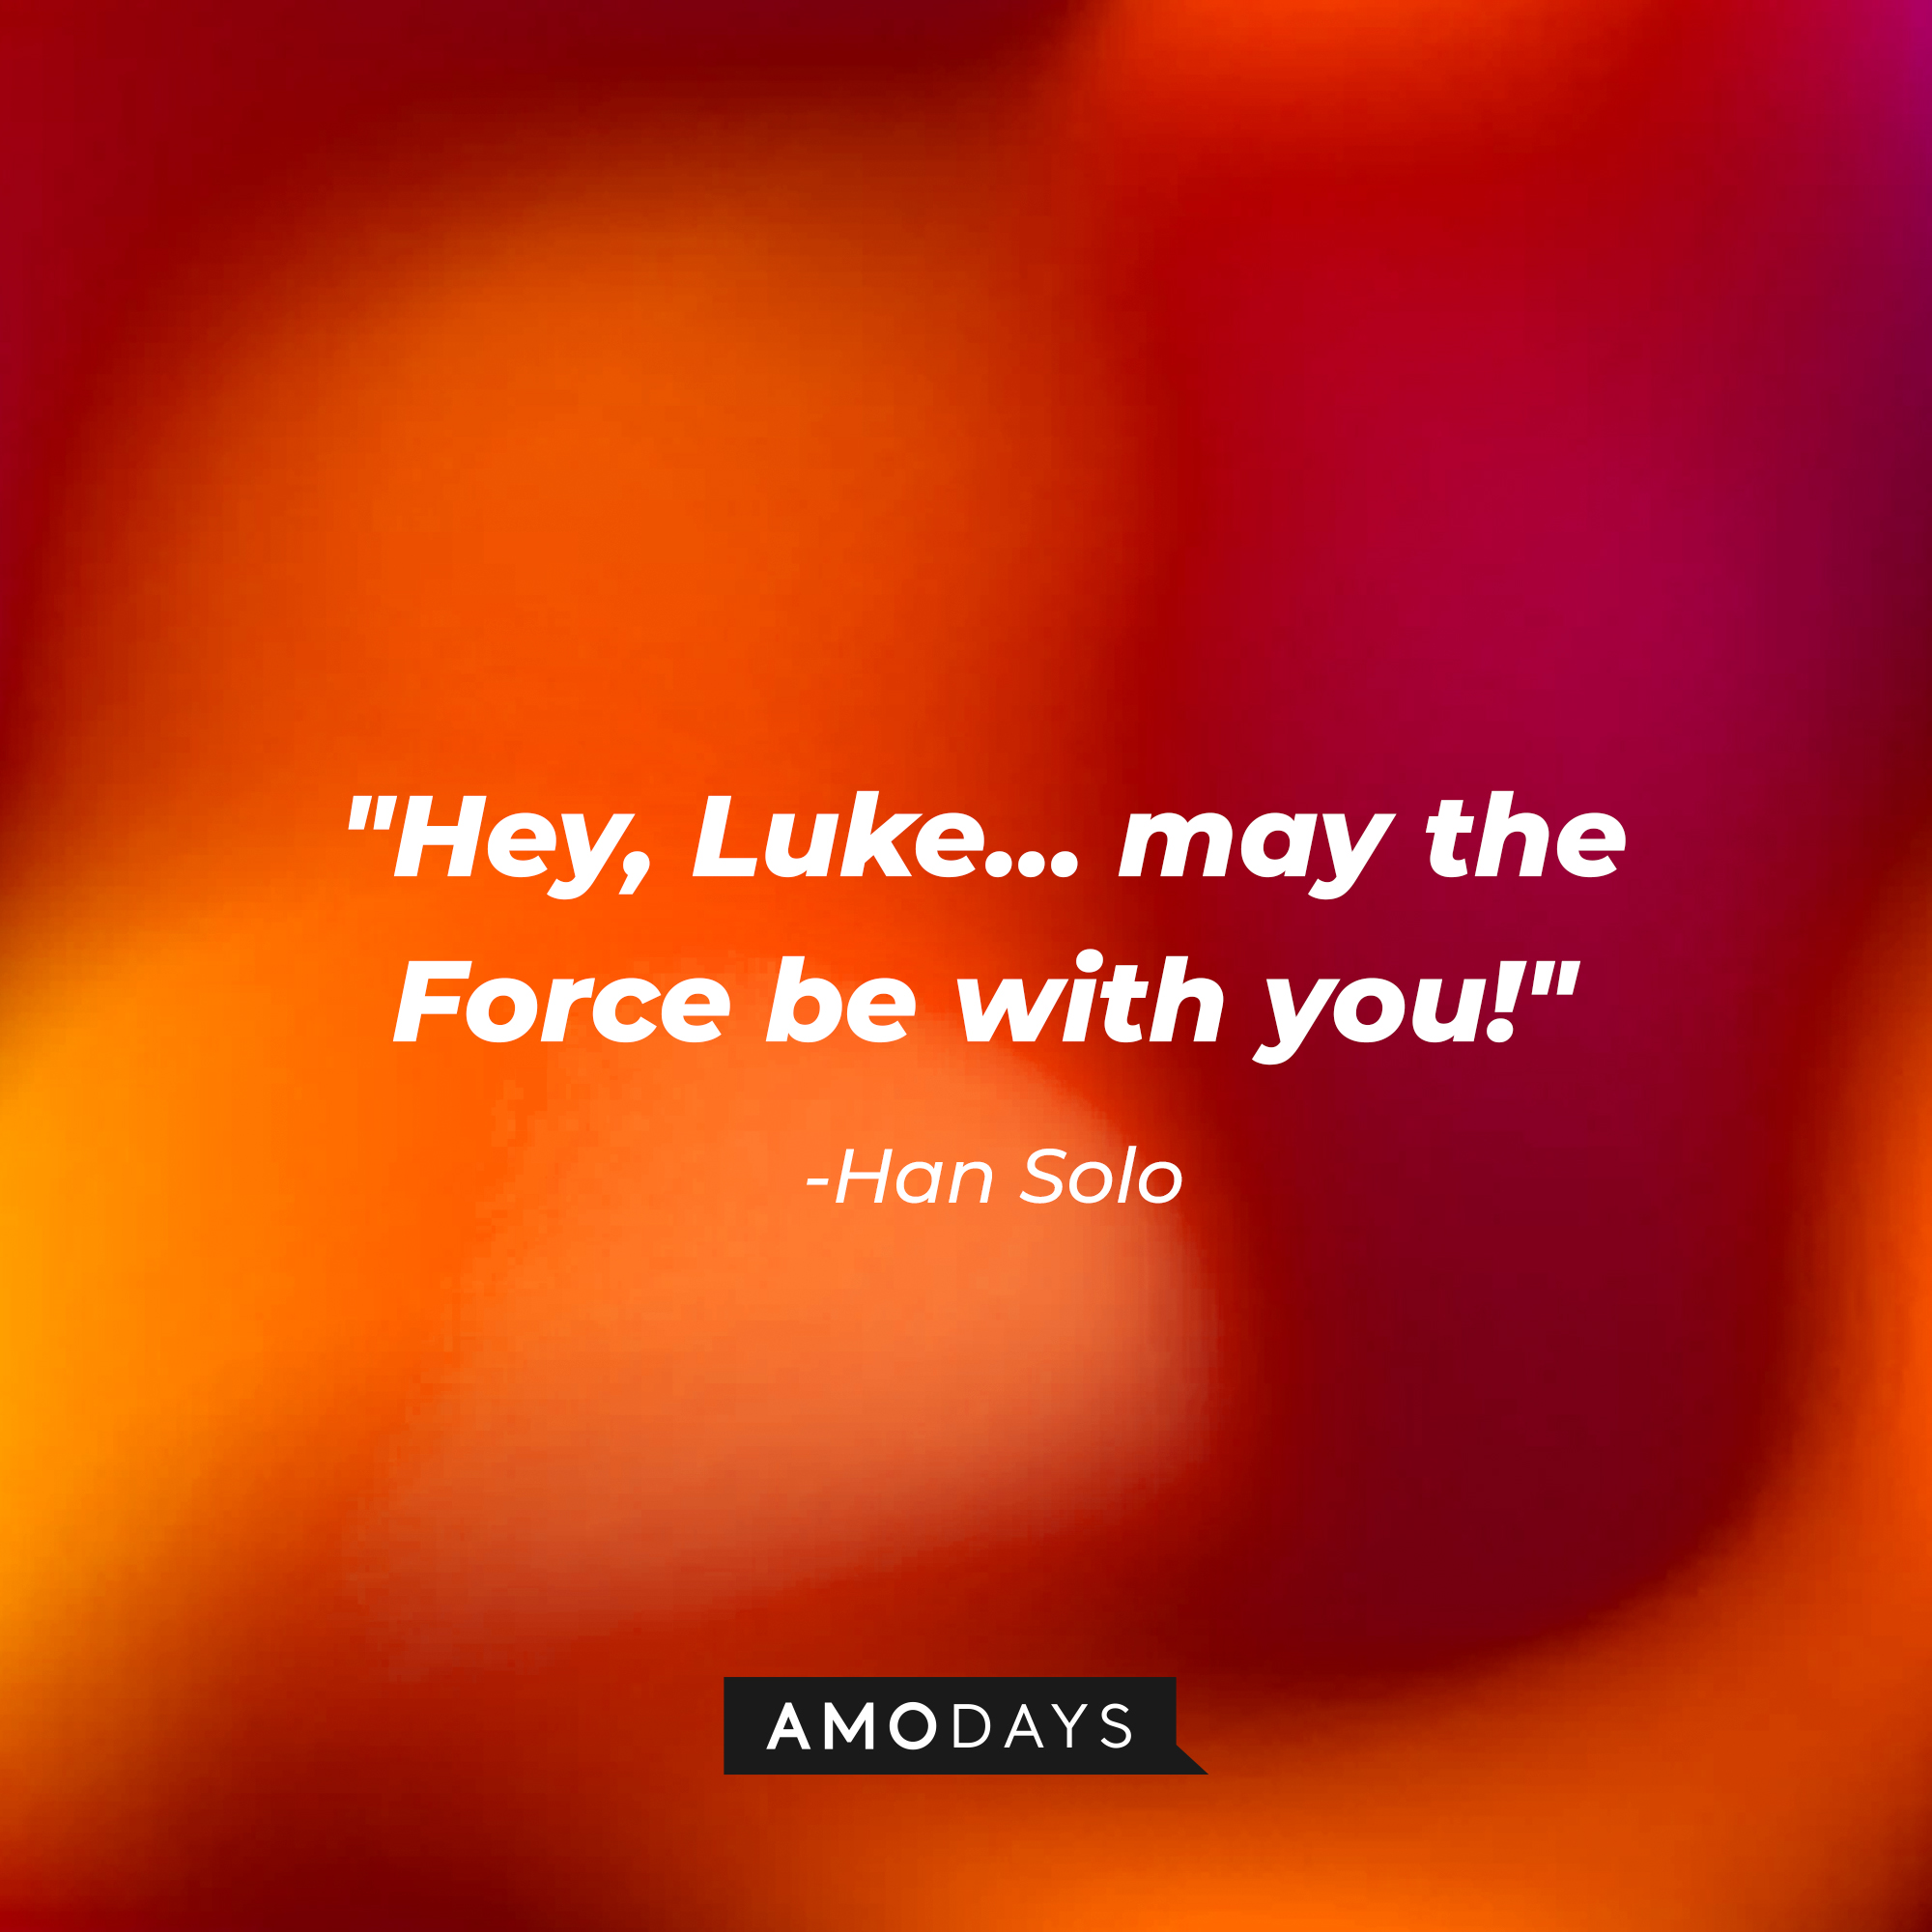 Han Solo’s quote: "Hey, Luke… may the Force be with you!" | Source: AmoDays